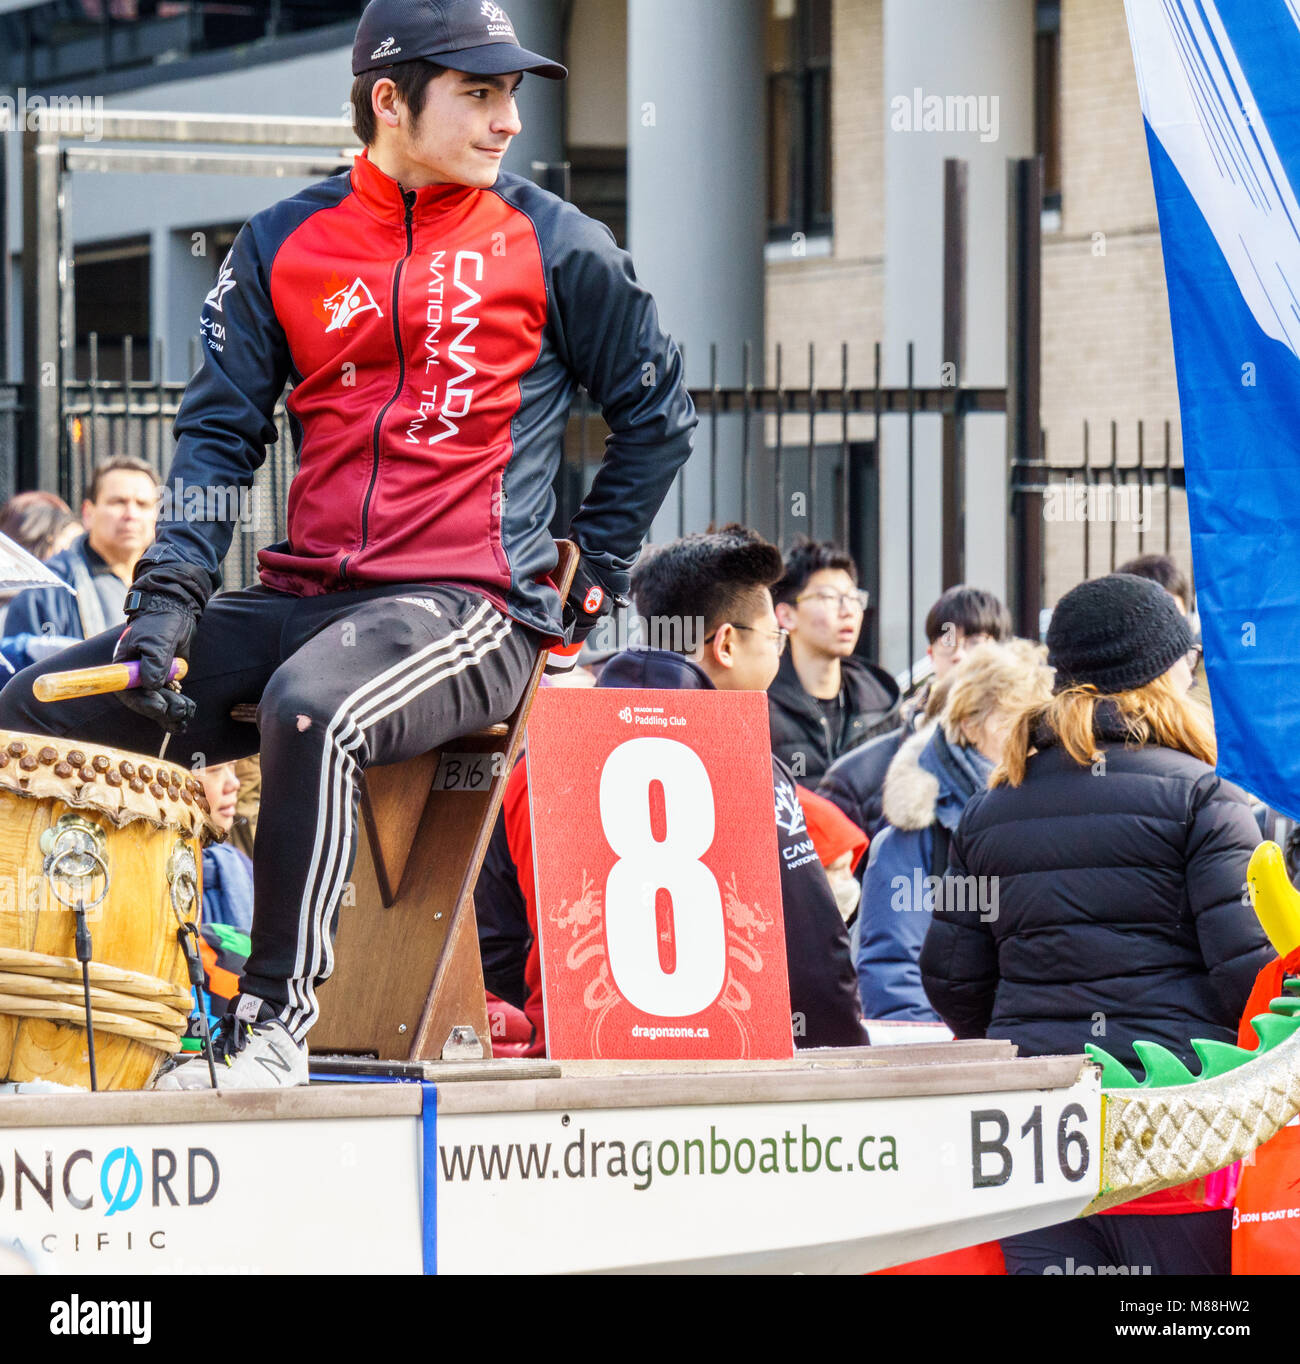 VANCOUVER, CANADA - February 18, 2018: Man in dragon boat at Chinese New Year parade in Vancouver Chinatown. Stock Photo